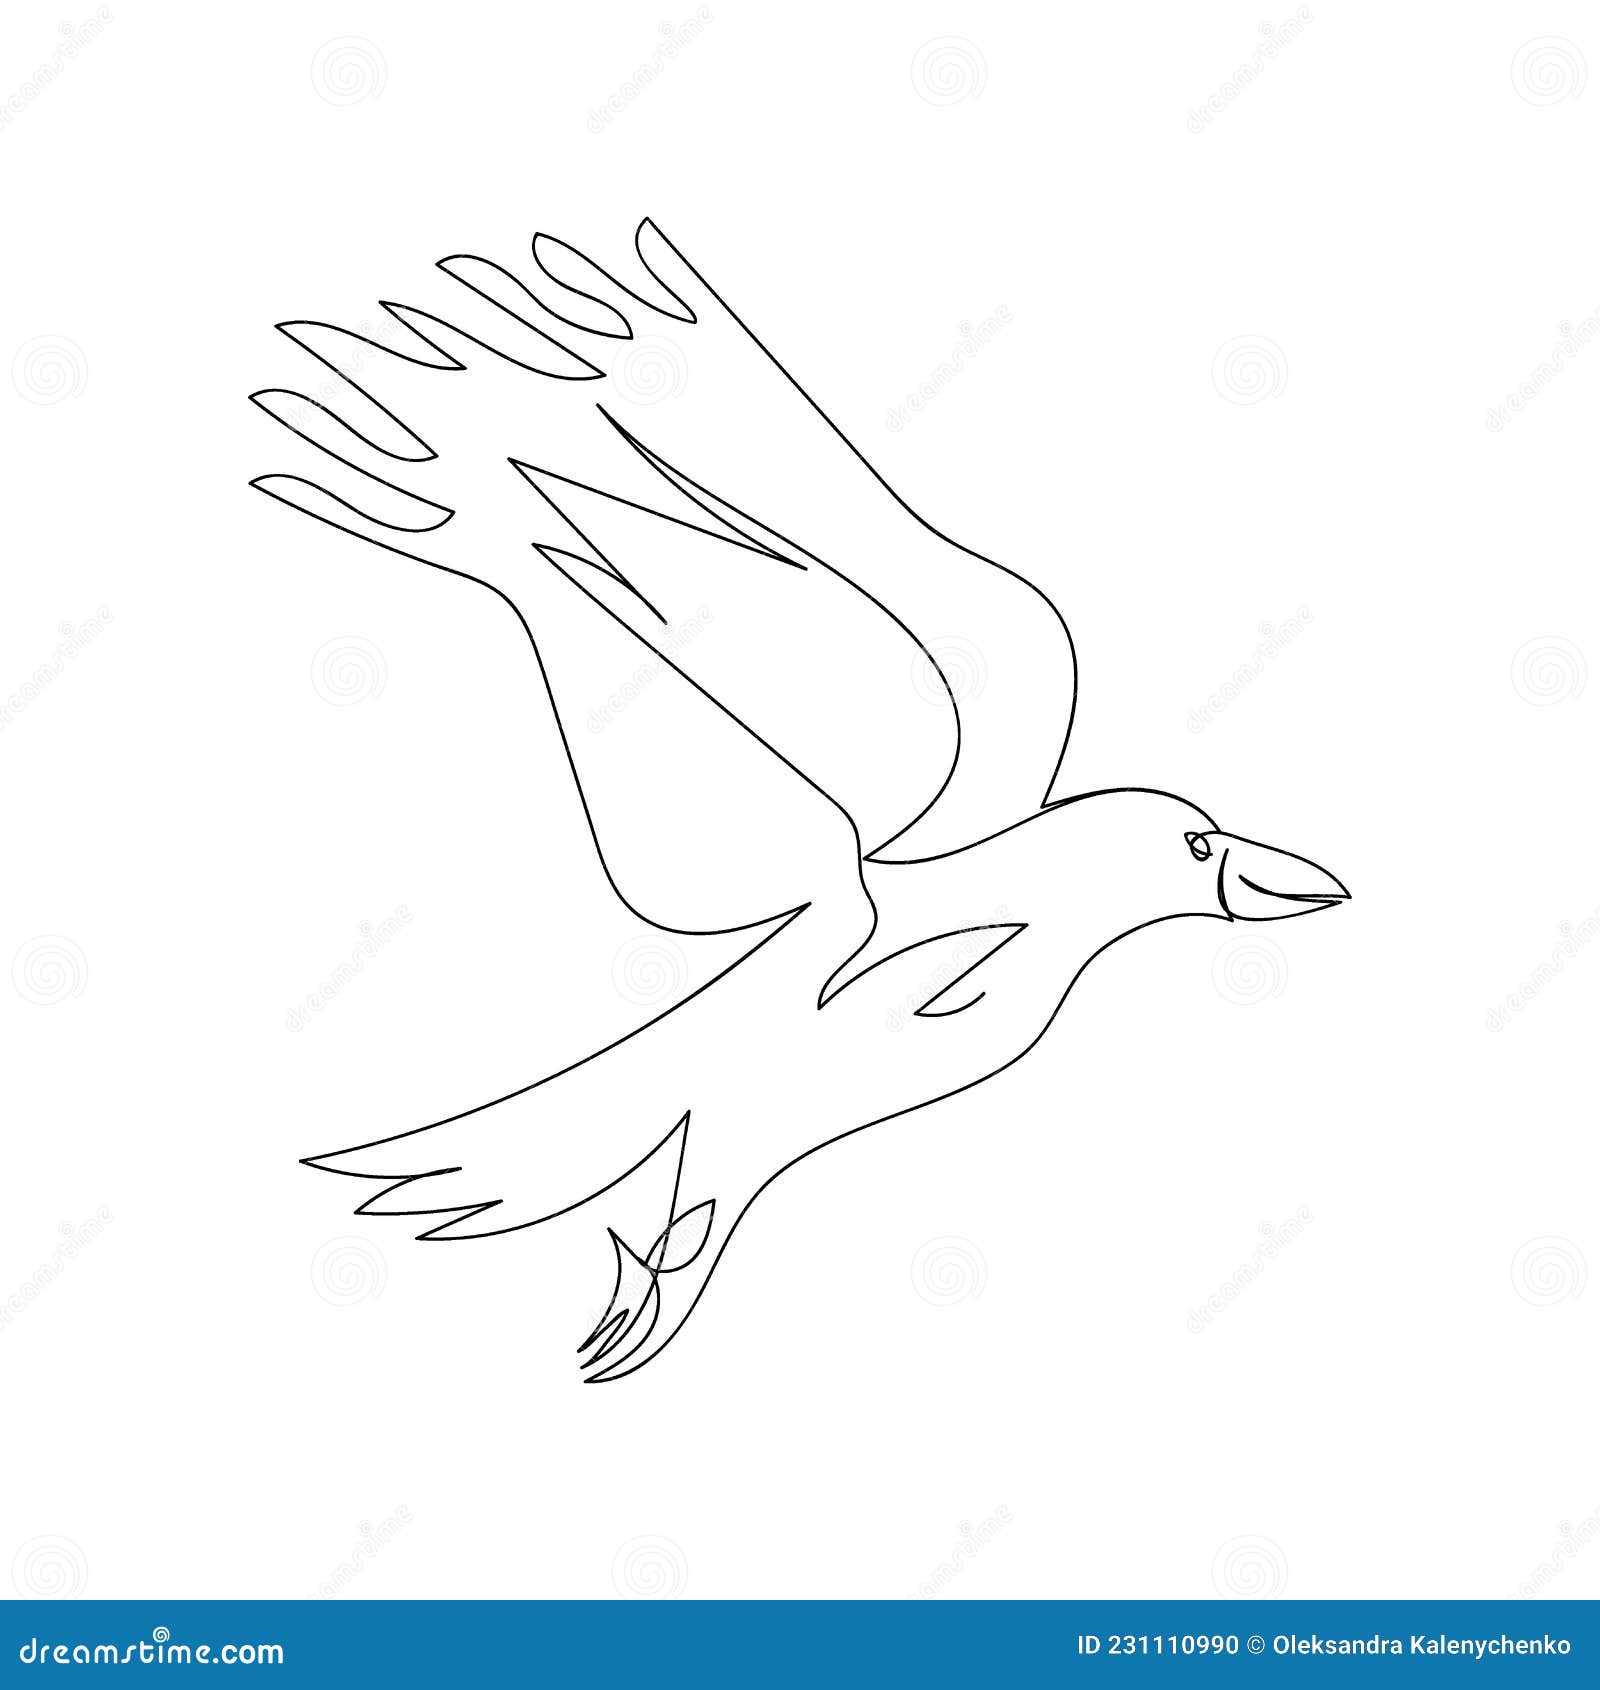 Crow Wings: Over 19,529 Royalty-Free Licensable Stock Illustrations &  Drawings | Shutterstock